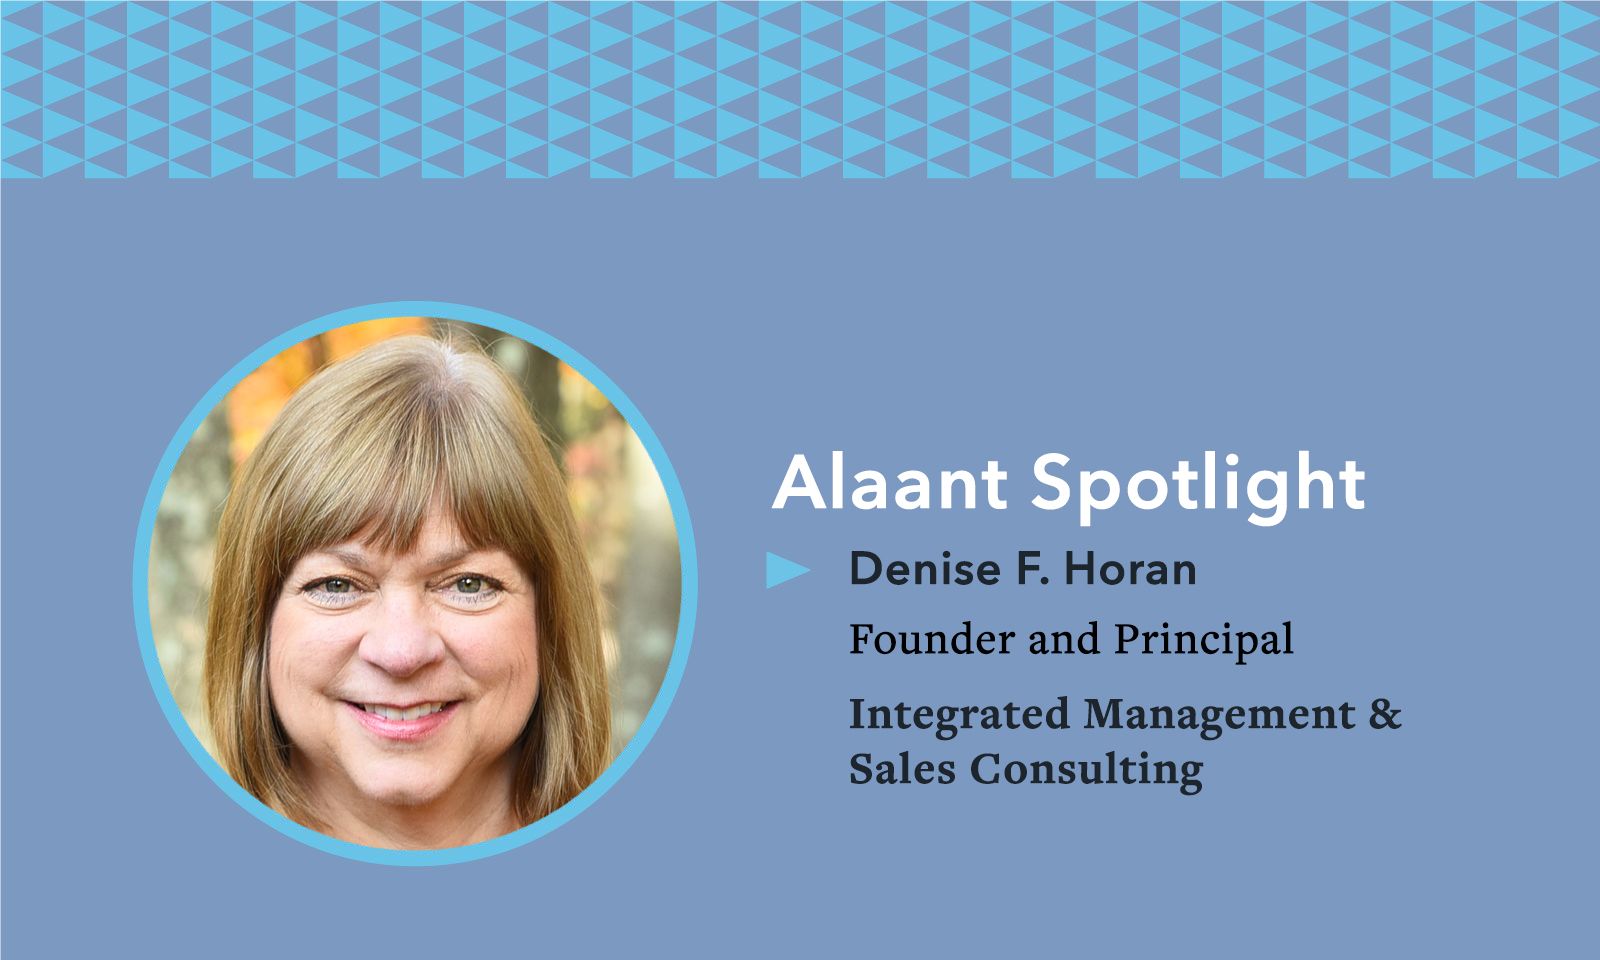 Alaant Spotlight: Denise F. Horan, Founder and Principal, Integrated Management & Sales Consulting